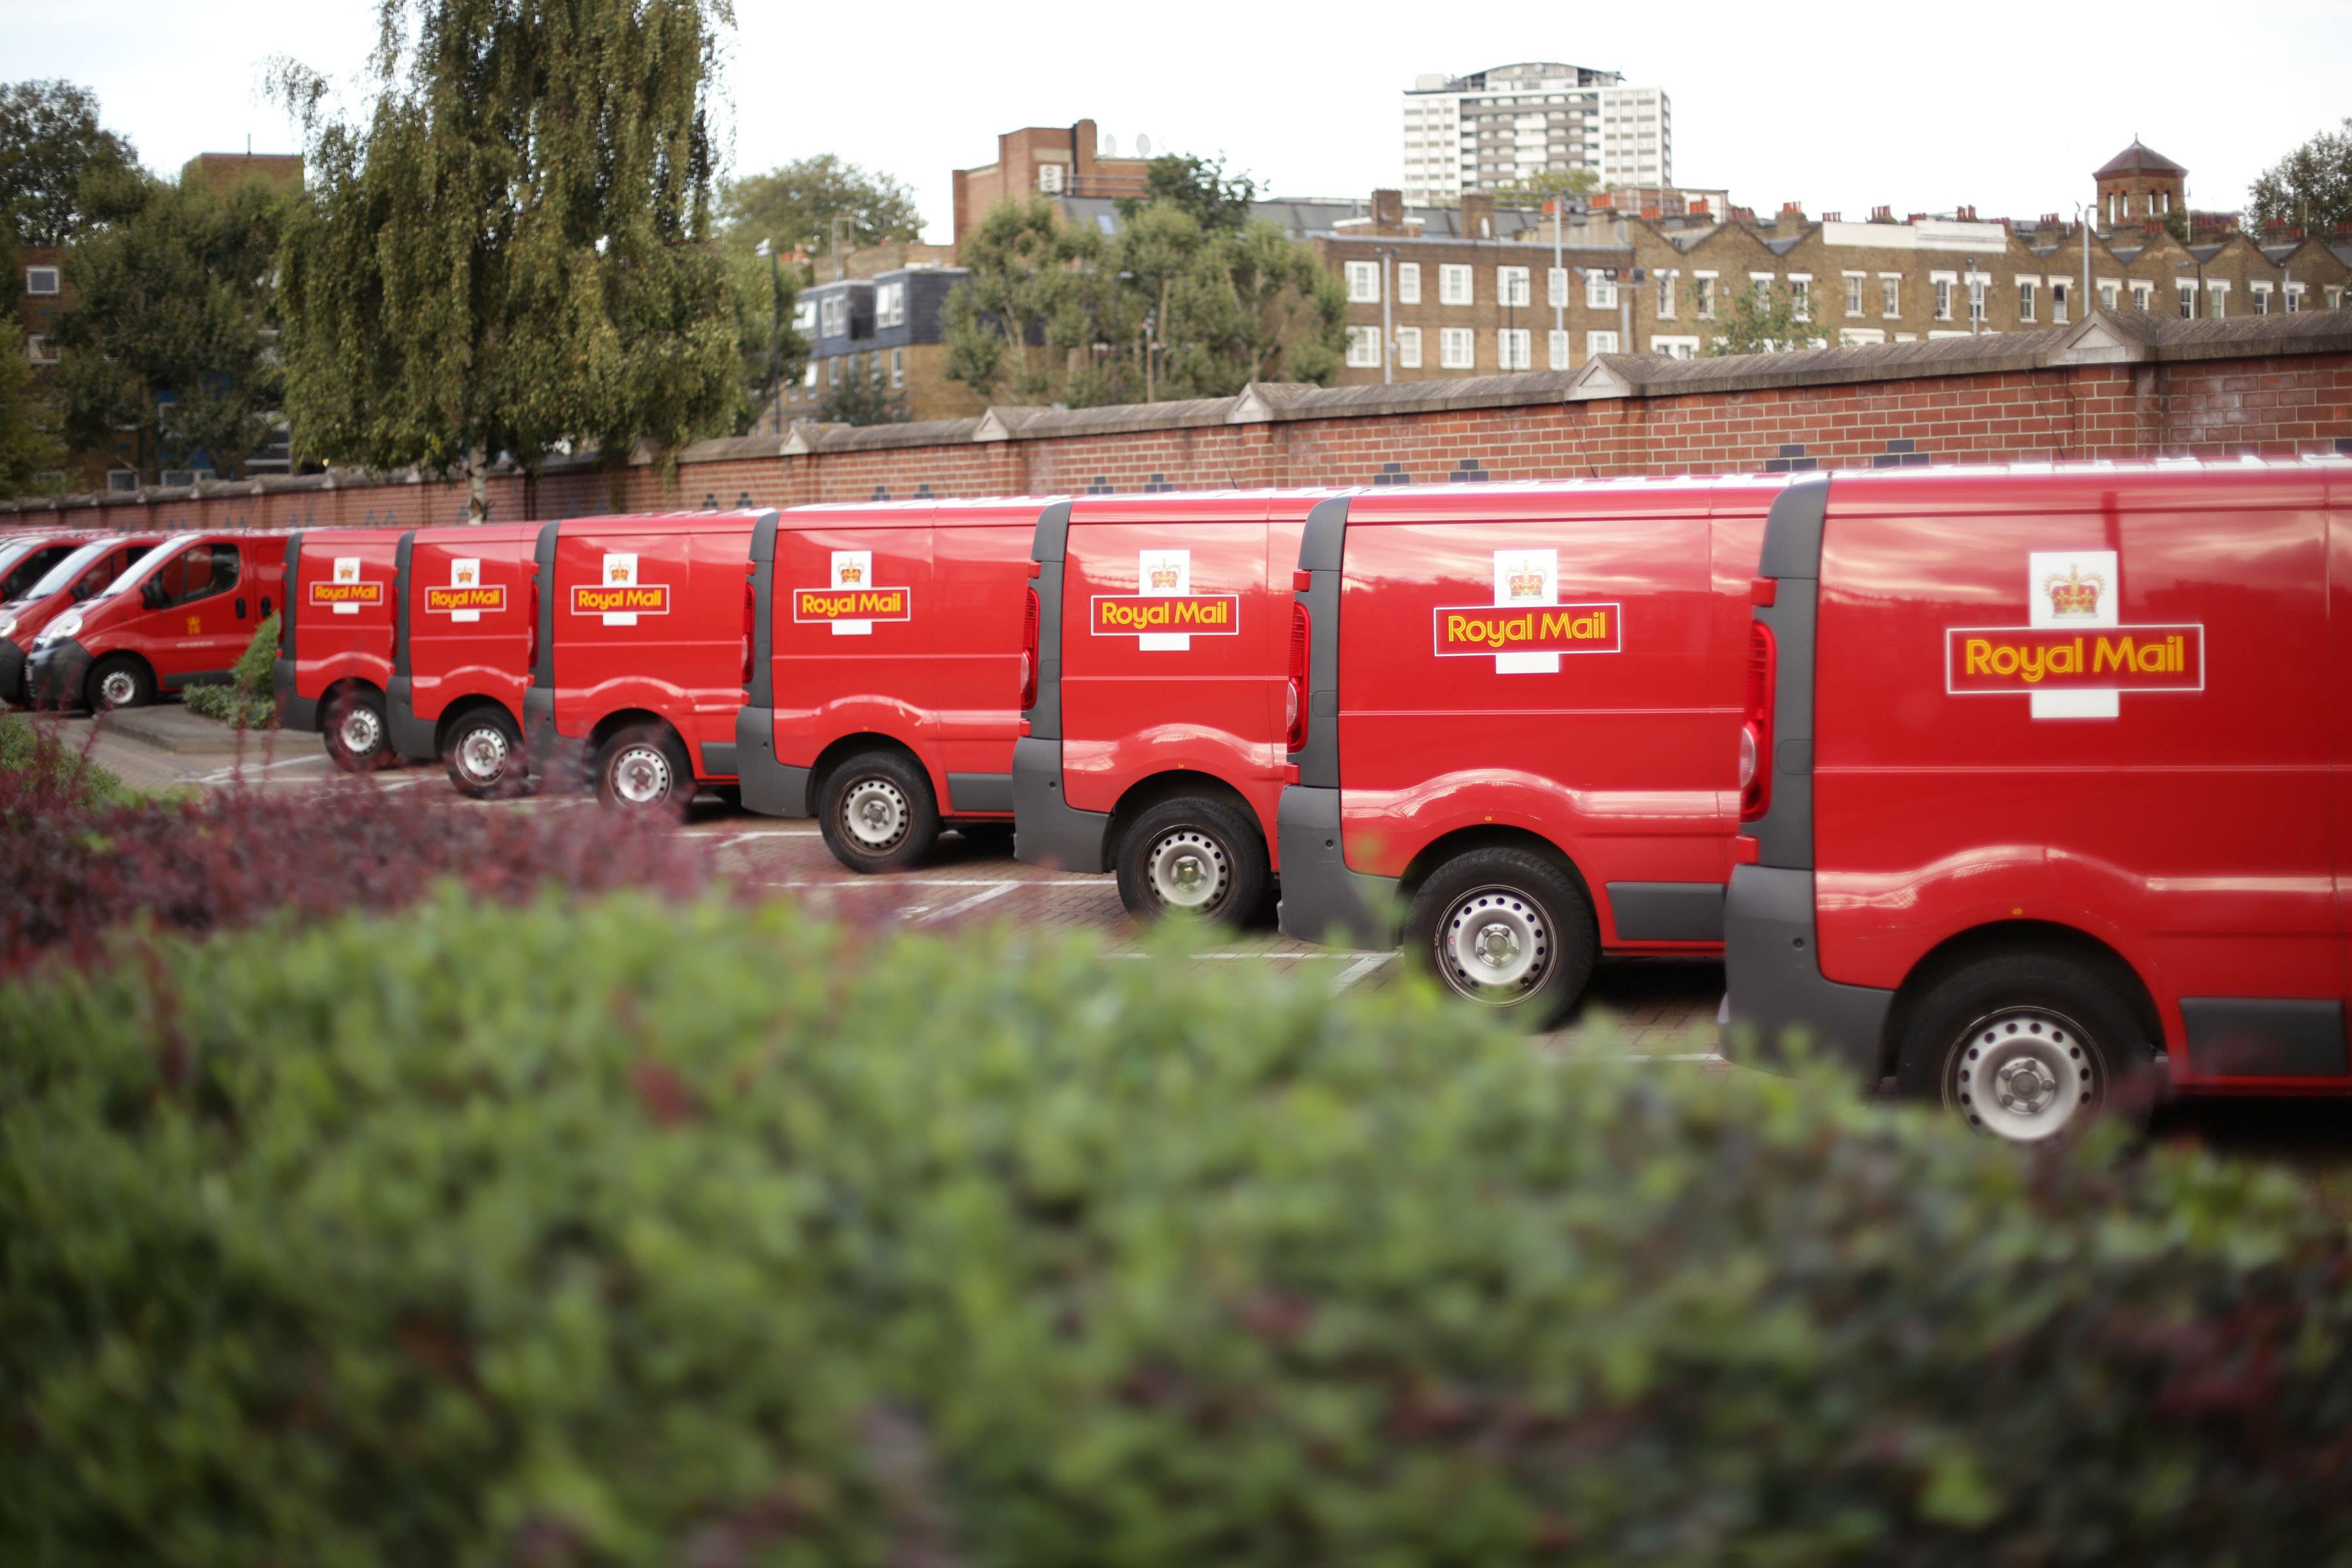 Royal Mail workers have voted to continue the campaign of industrial action